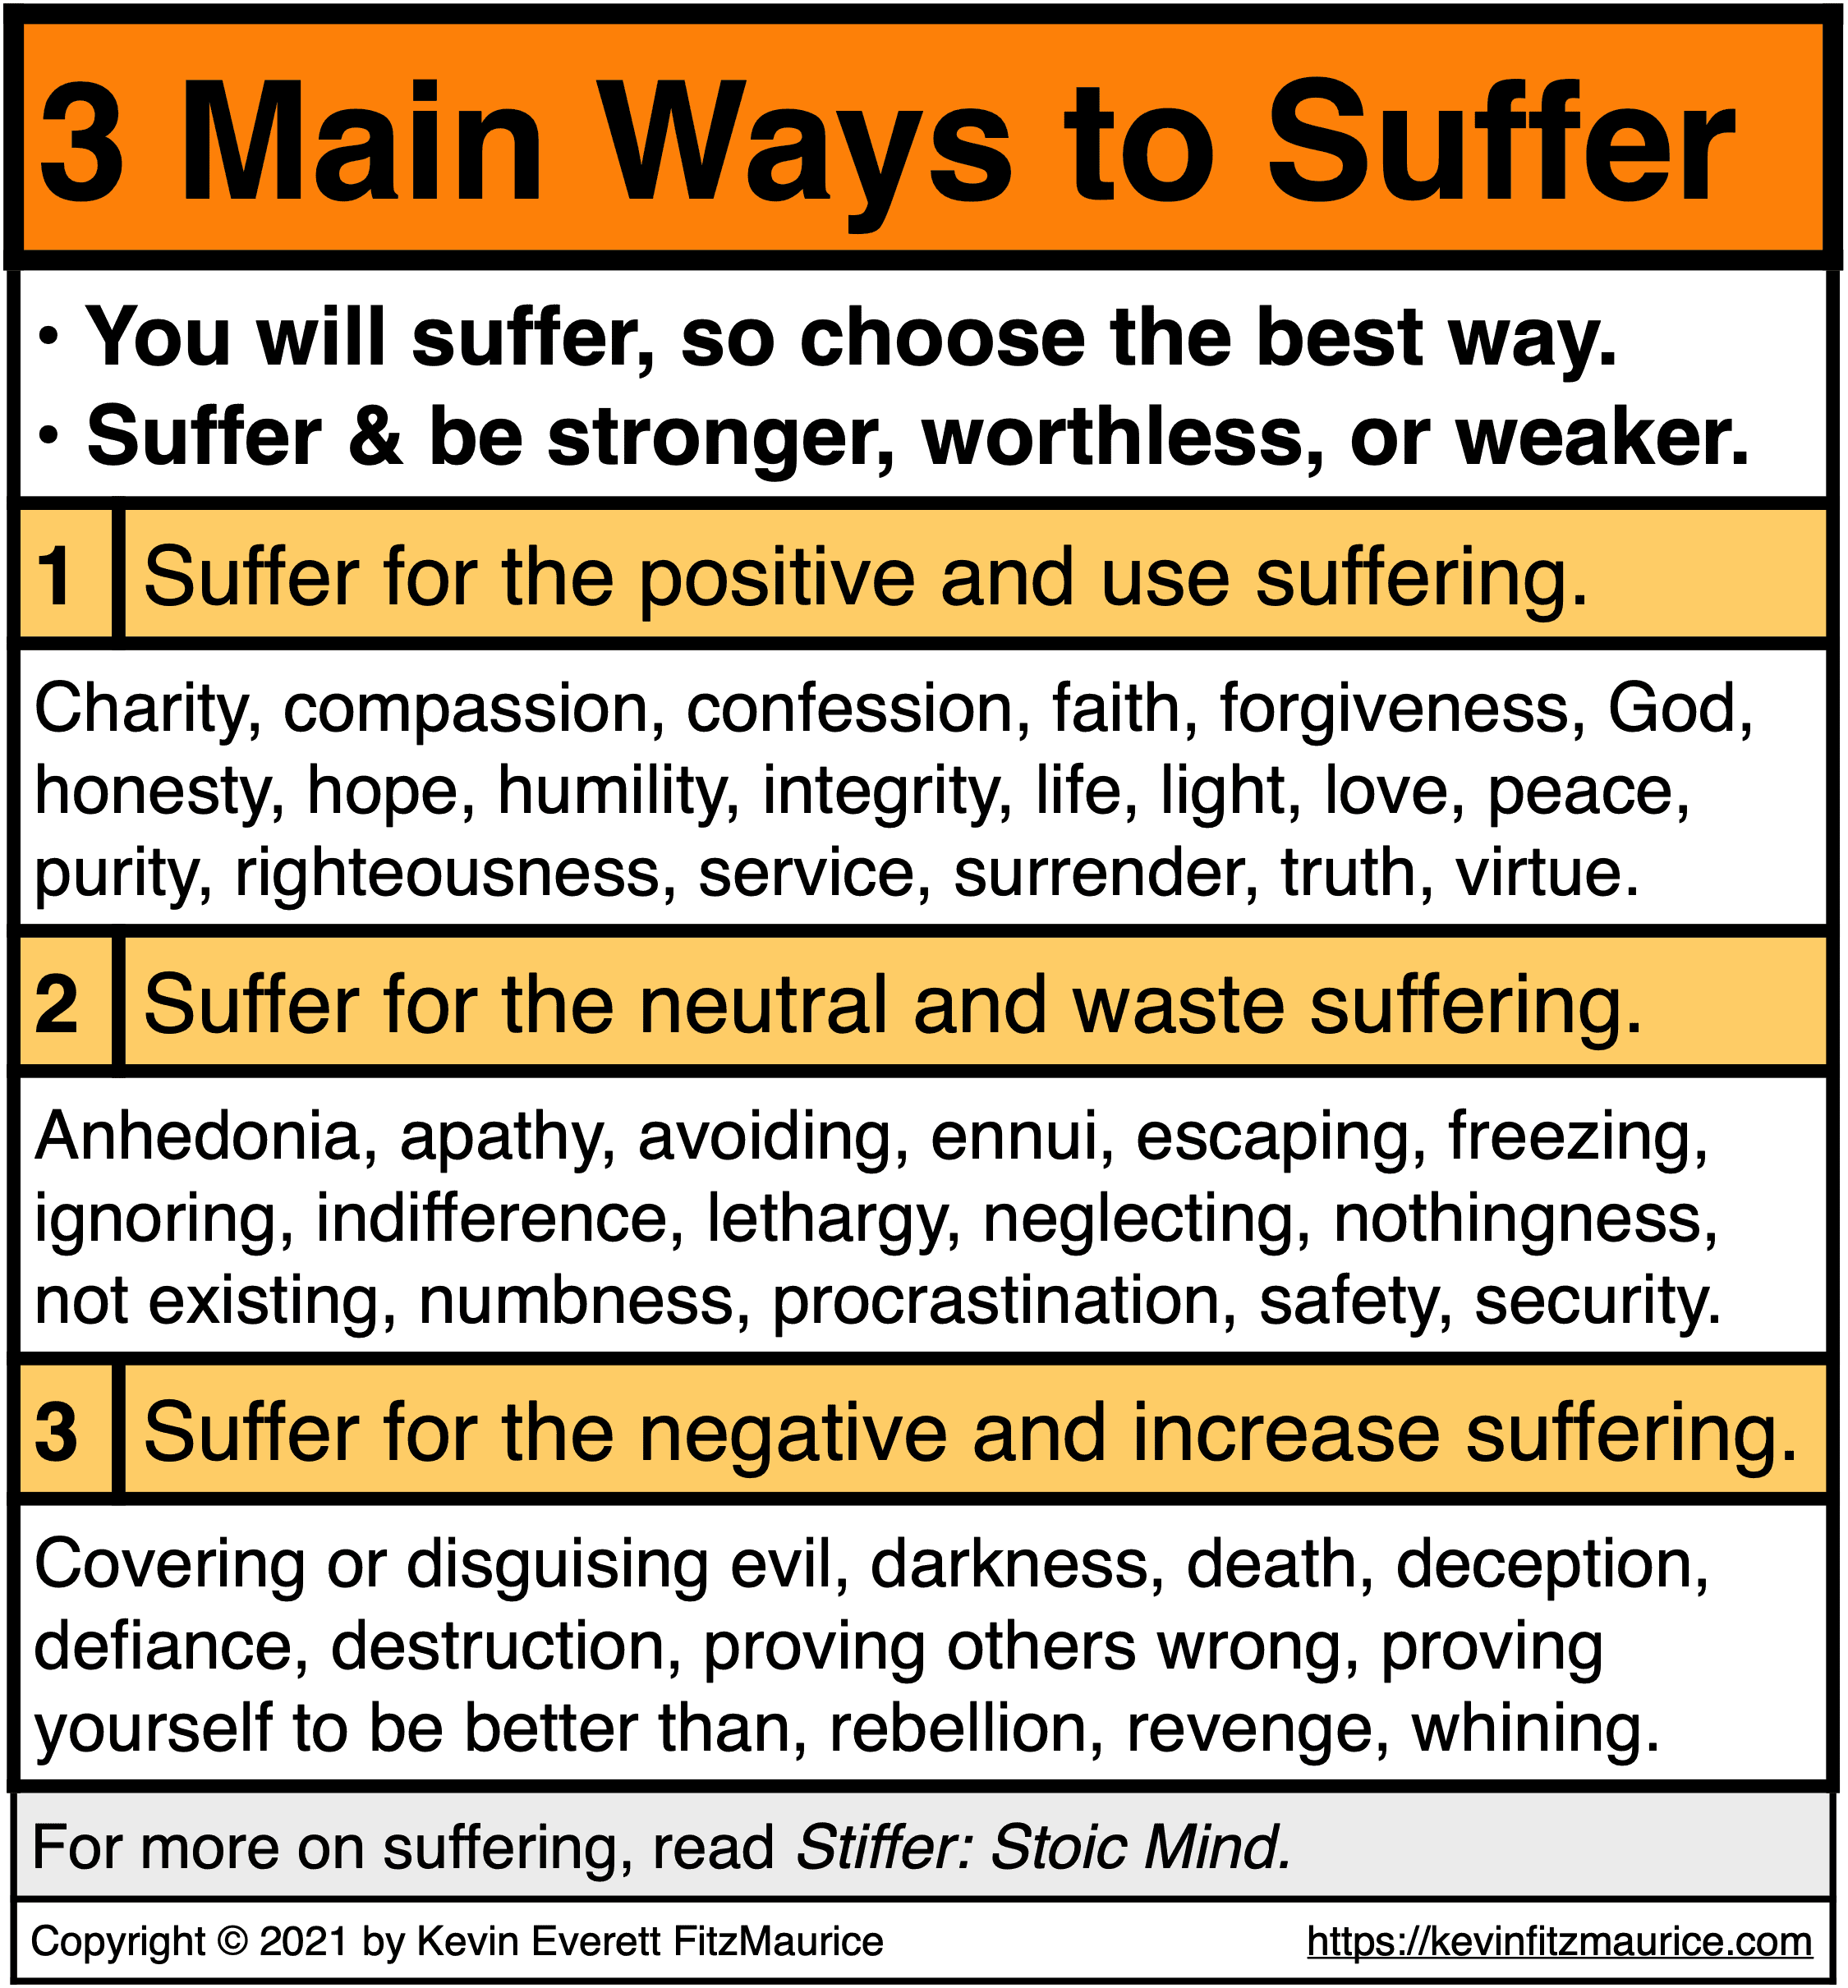 3 Main Ways You Can Choose to Suffer